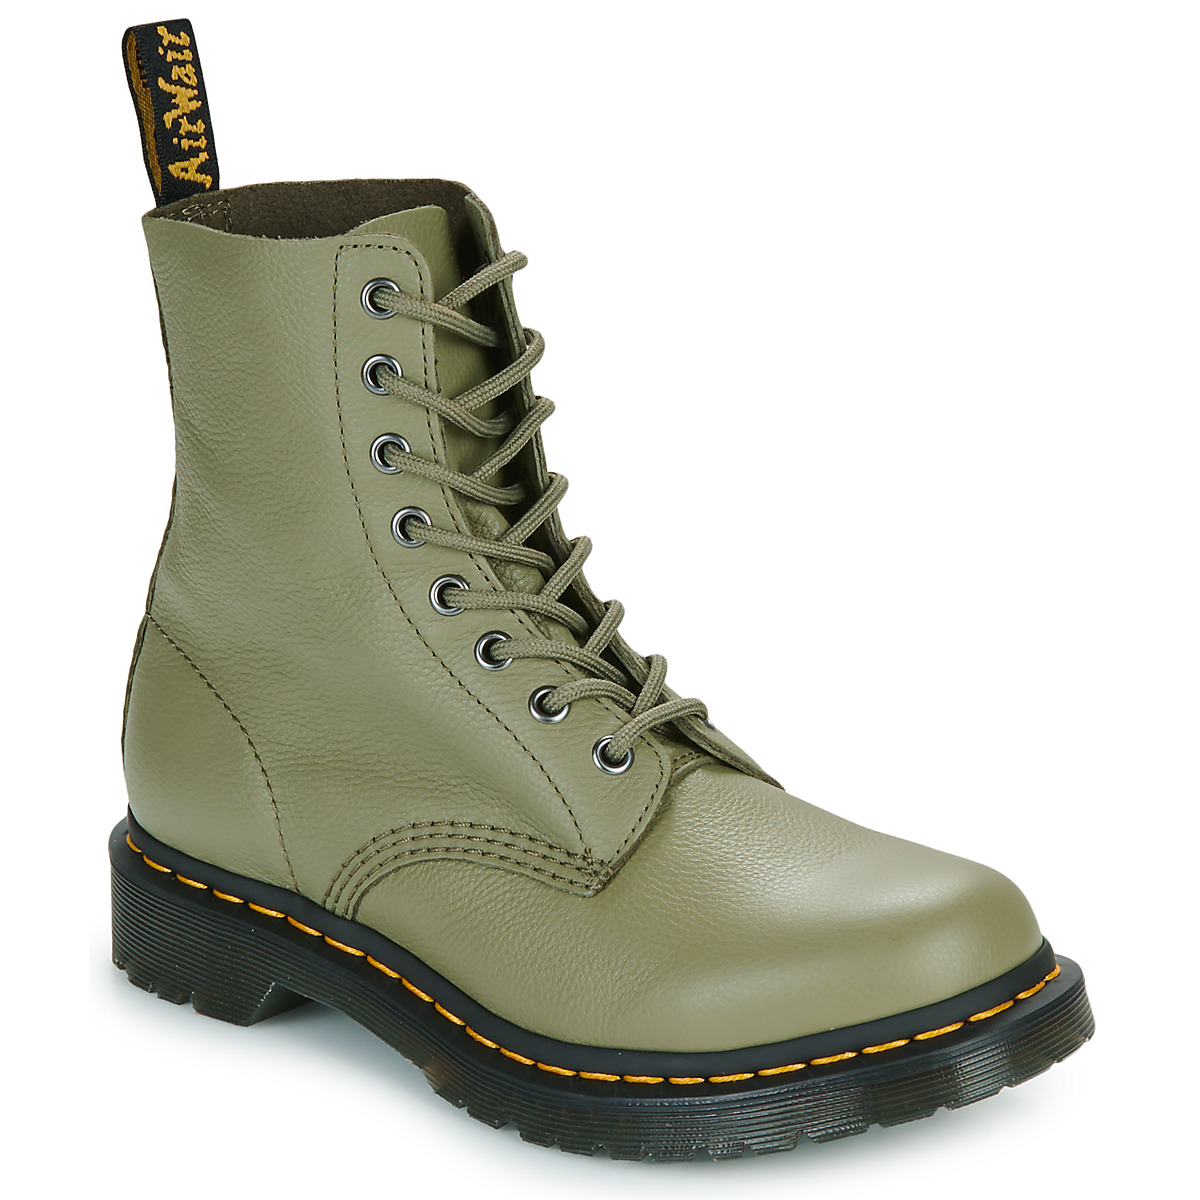 Shoes Women Mid boots Dr. Martens 1460 Pascal Muted Olive Virginia Kaki